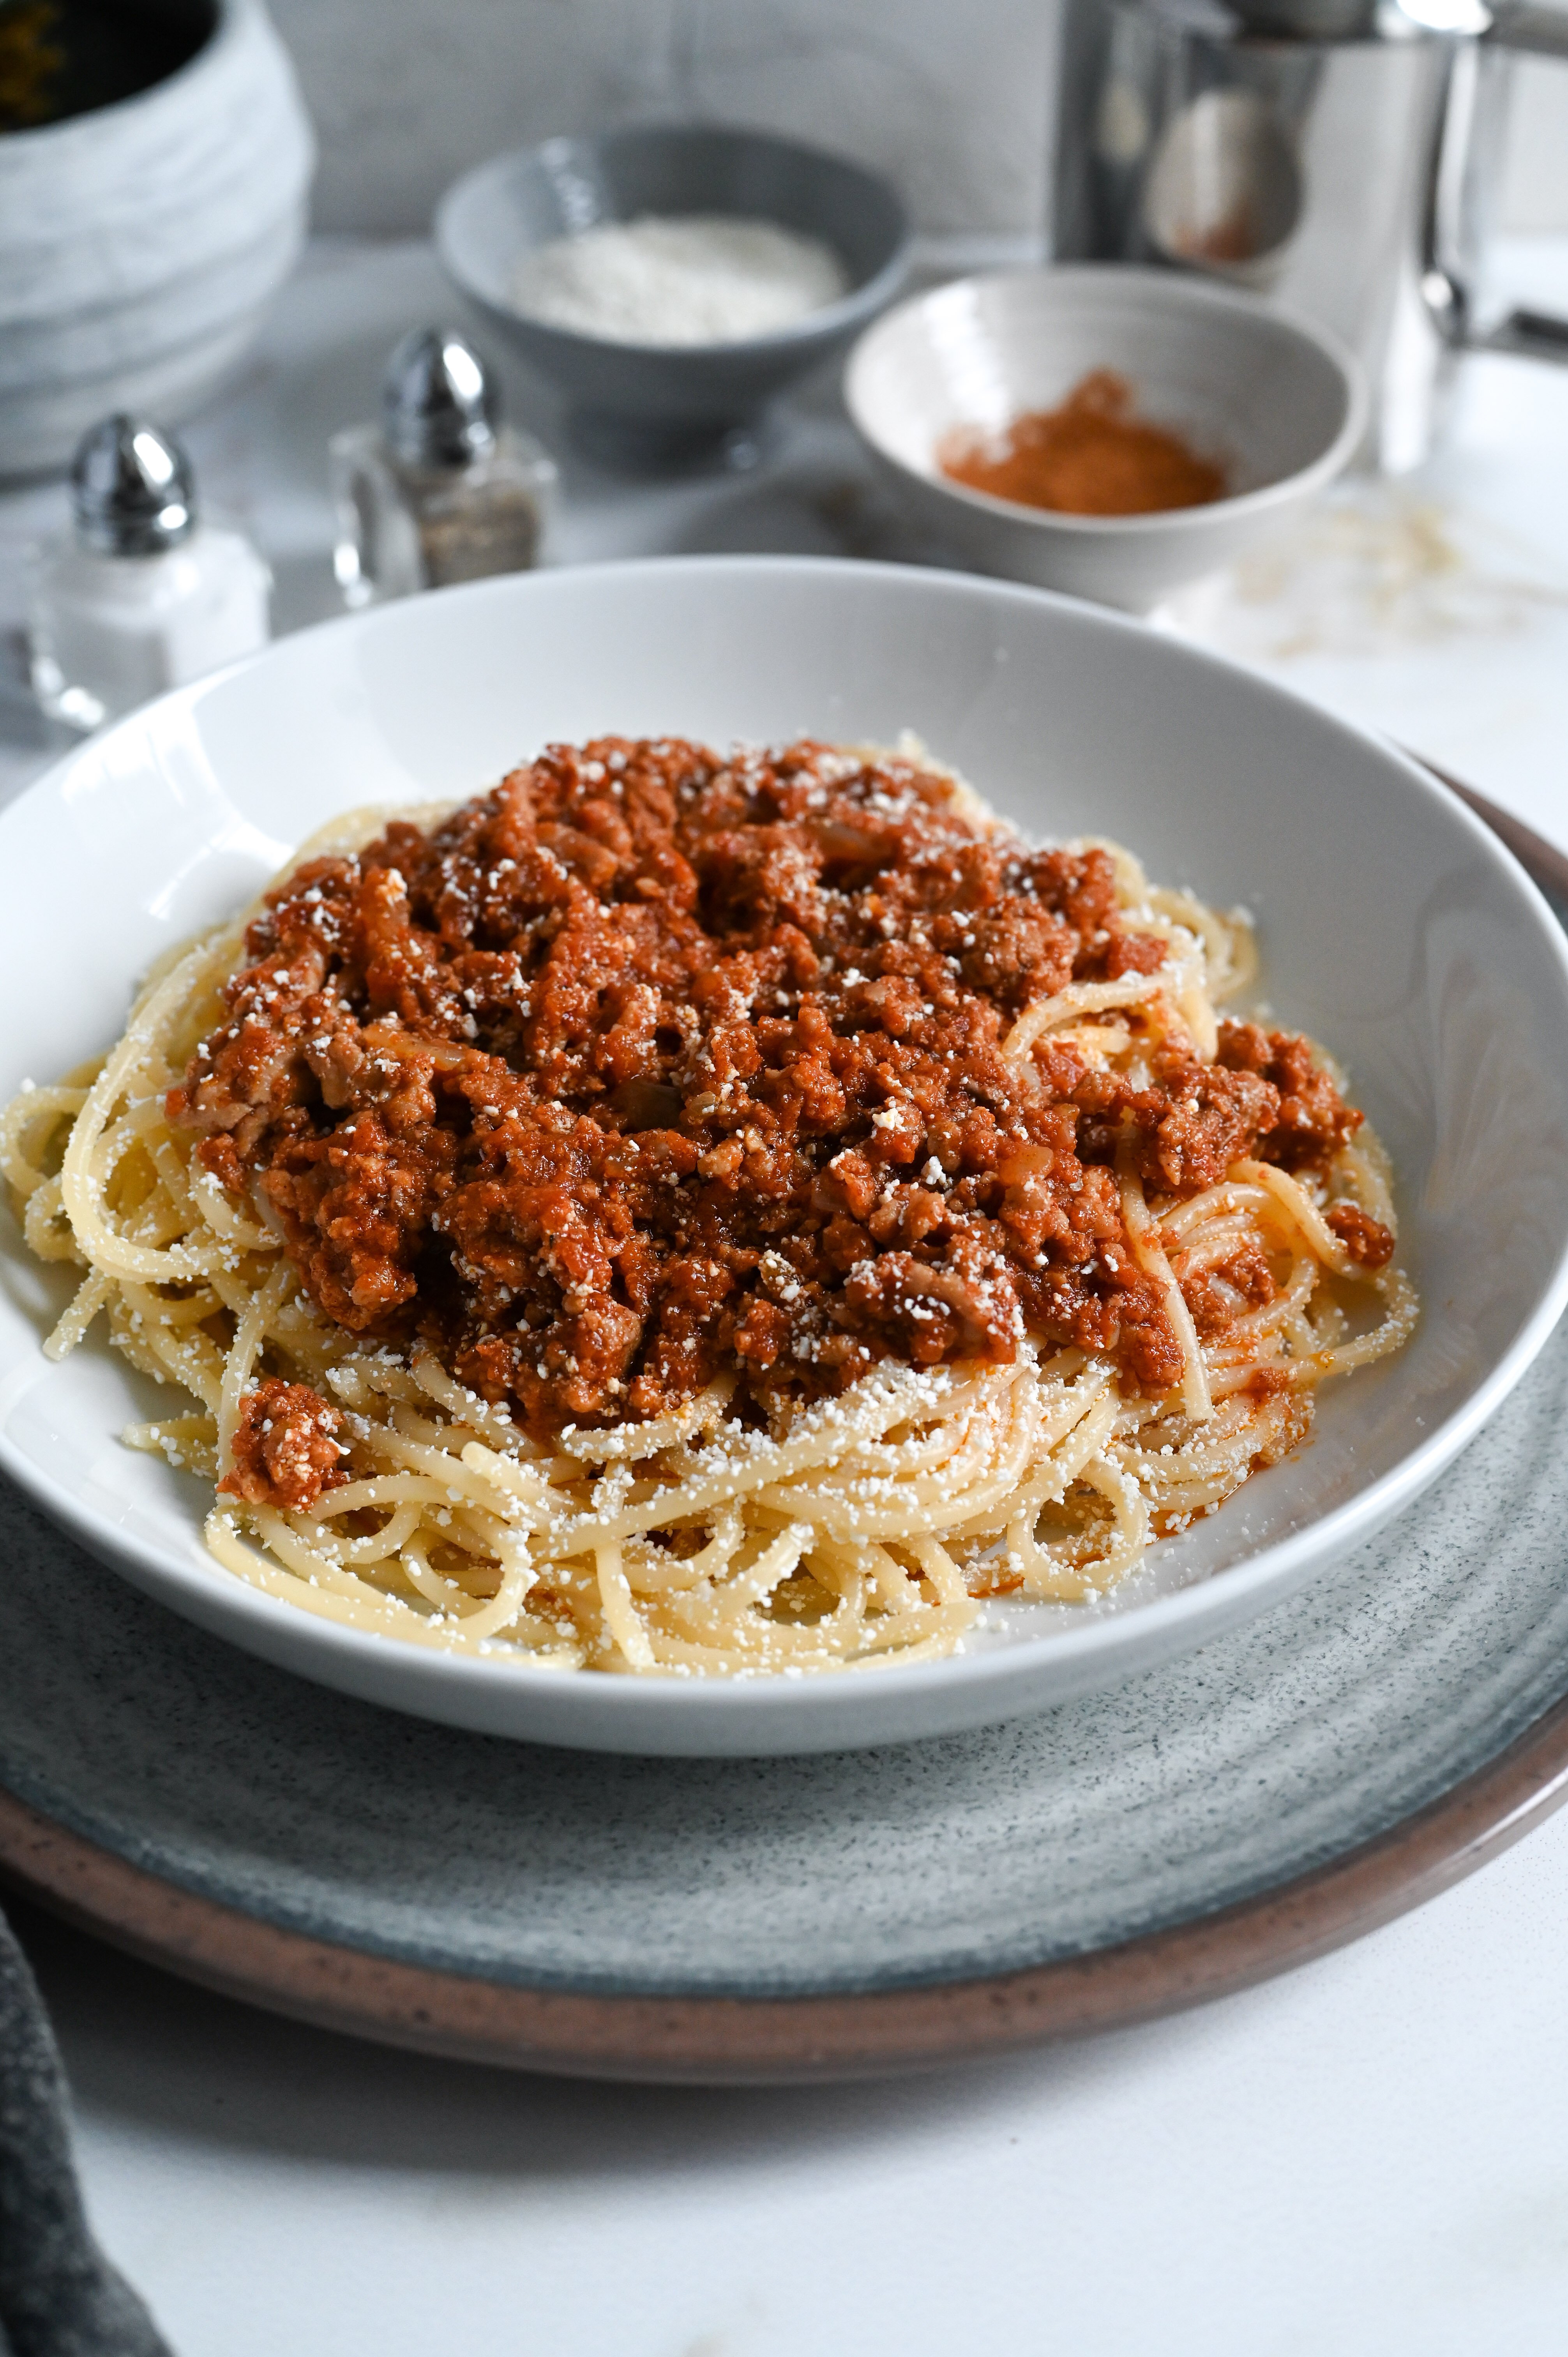 Greek-style spaghetti with meat sauce is a meal that is pure comfort food.